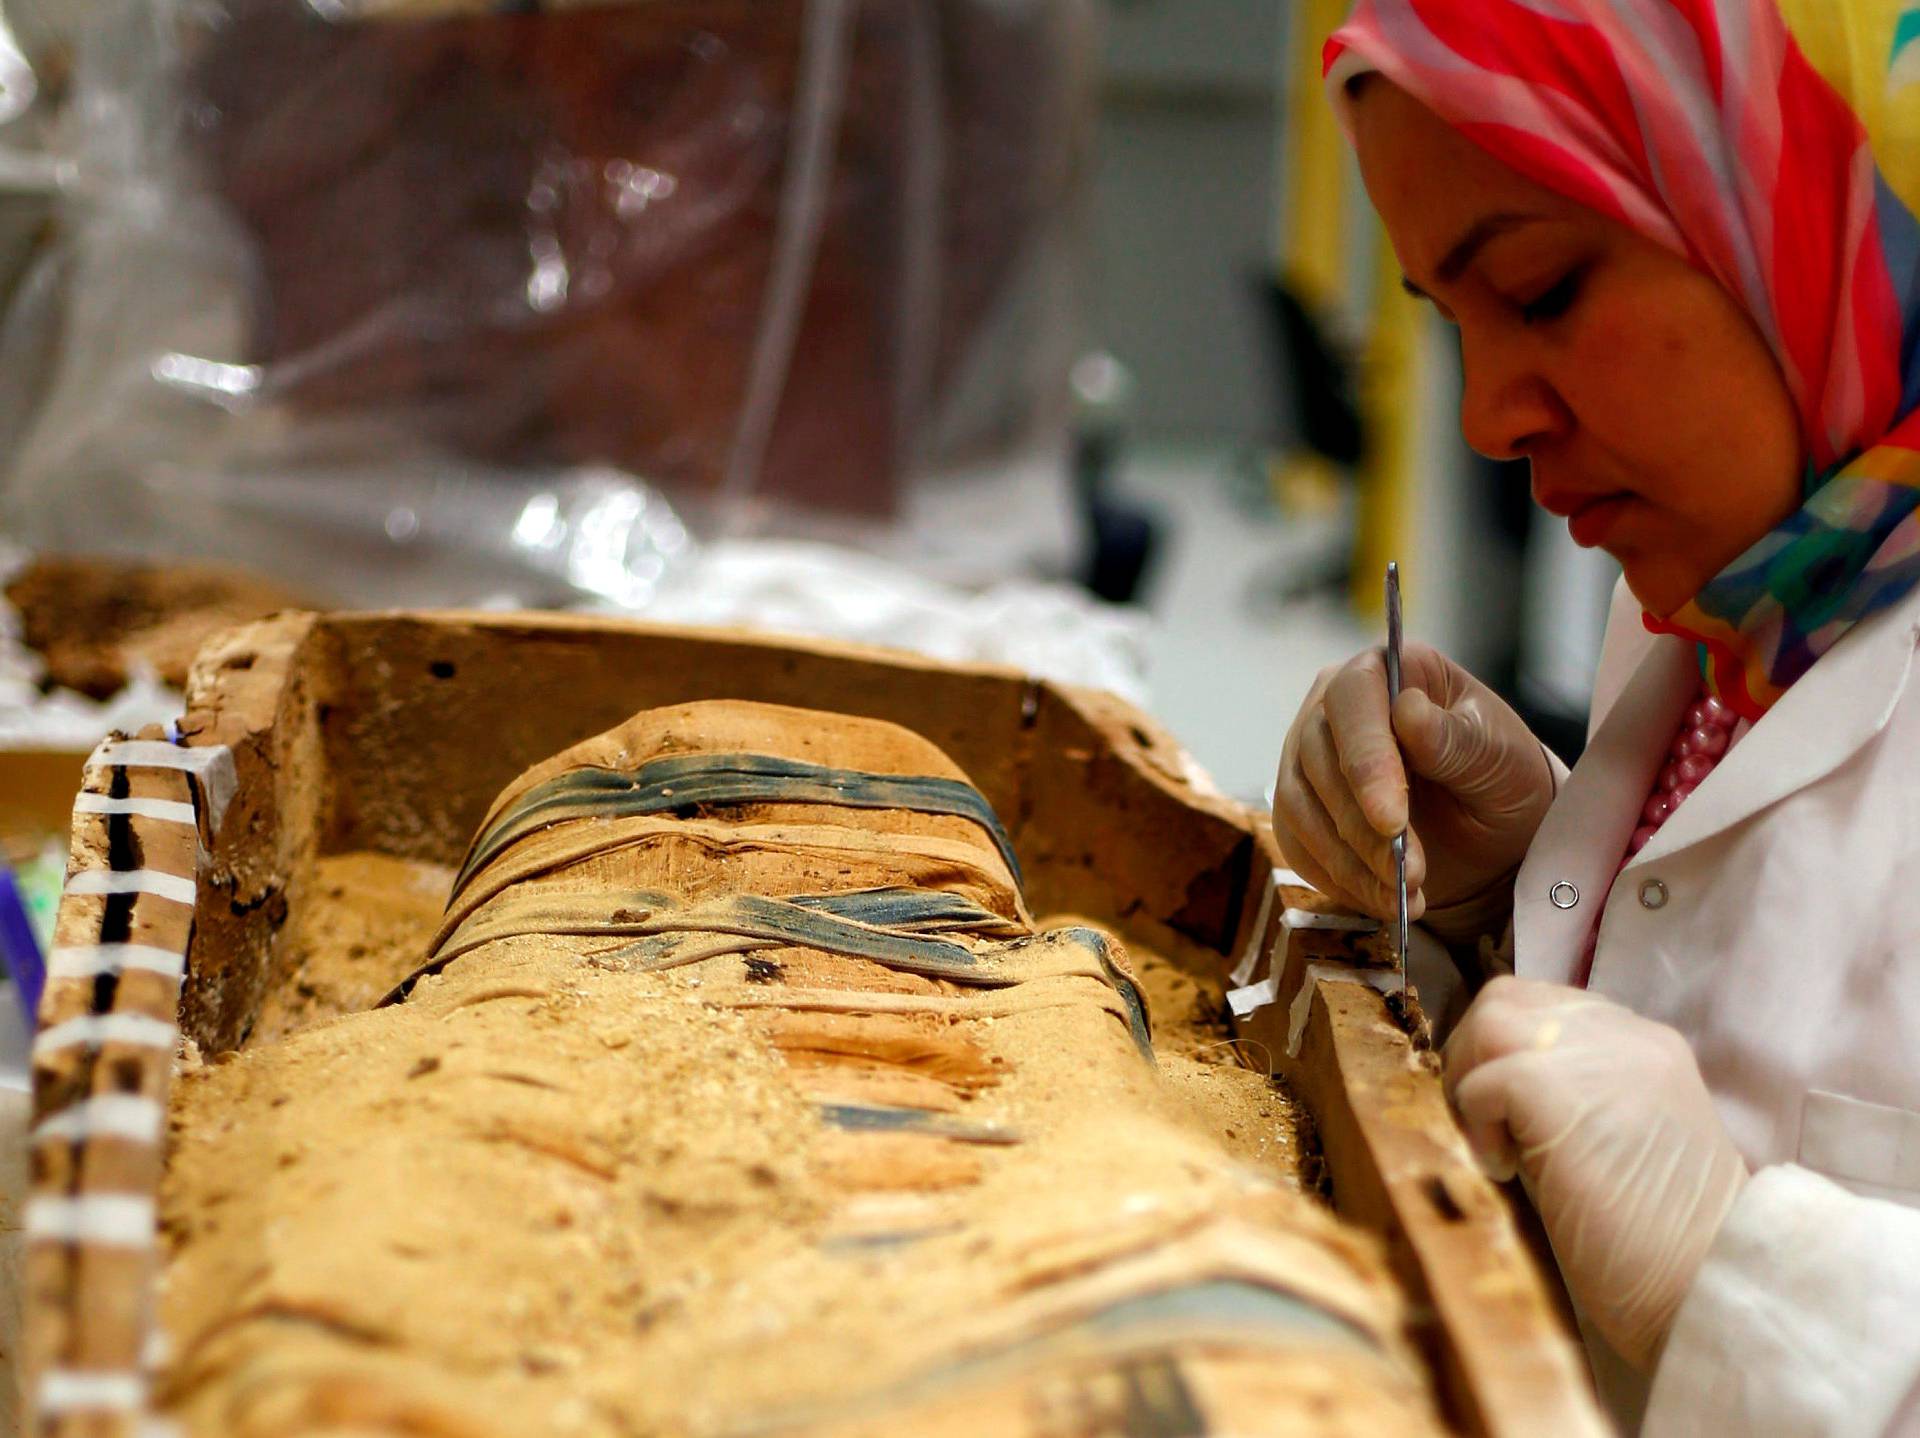 An Egyptian archaeological technician renovates one of the mummies which belonged to The Golden King Tutankhamun, in the conservation centre of the Grand Egyptian Museum, on the outskirts of Cairo